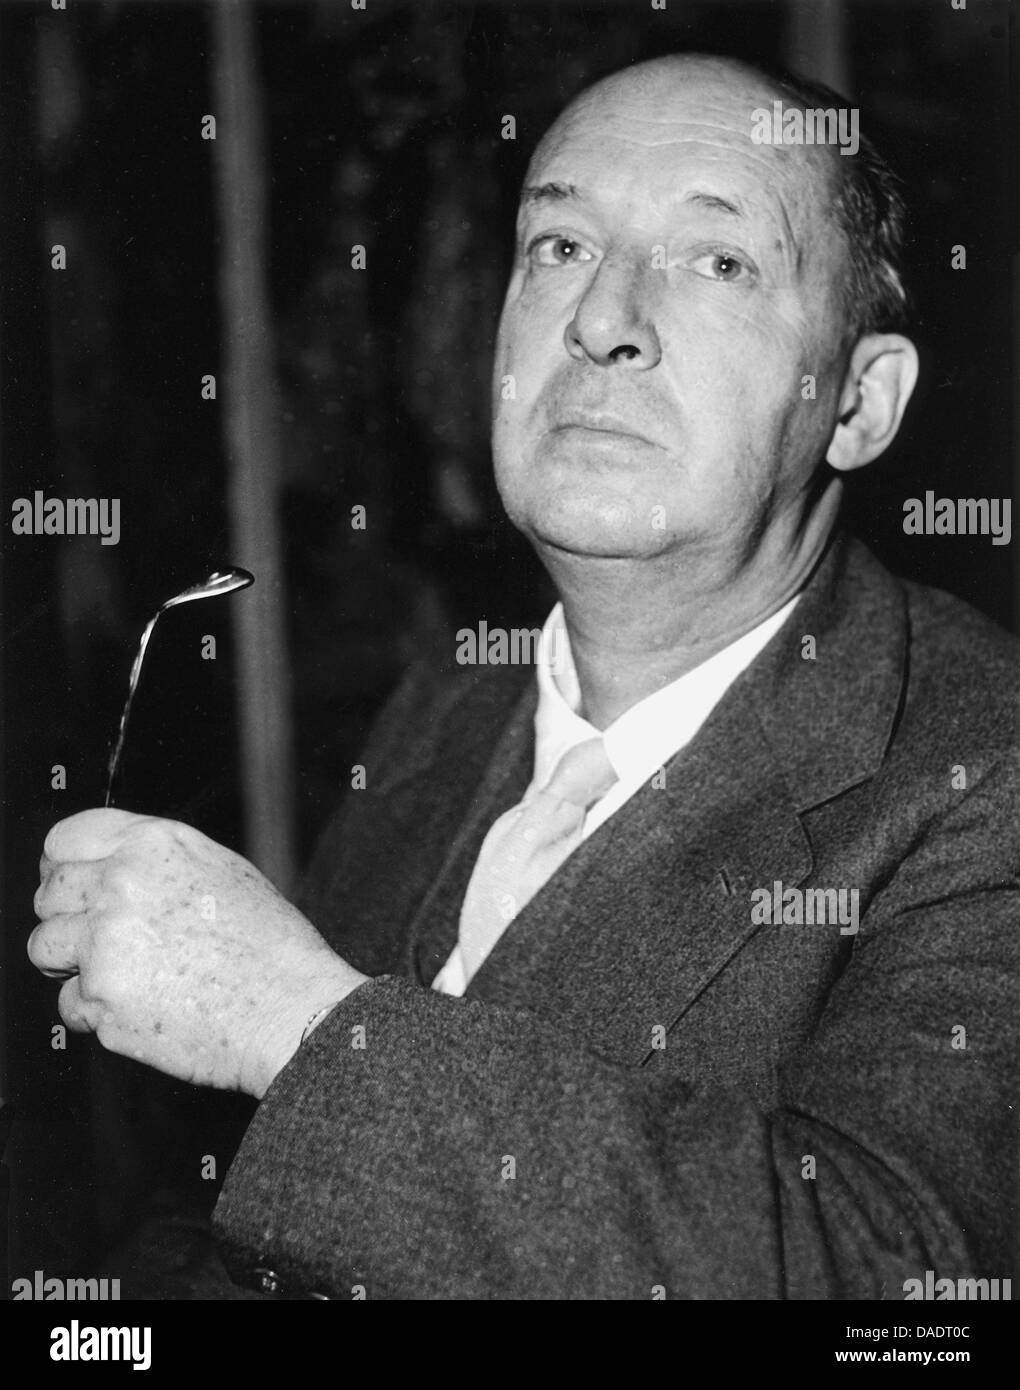 Russian author Vladimir Nabokov in 1958. Portrait by photographer Fred Stein (1909-1967) who emigrated 1933 from Nazi Germany to France and finally to the USA. Stock Photo